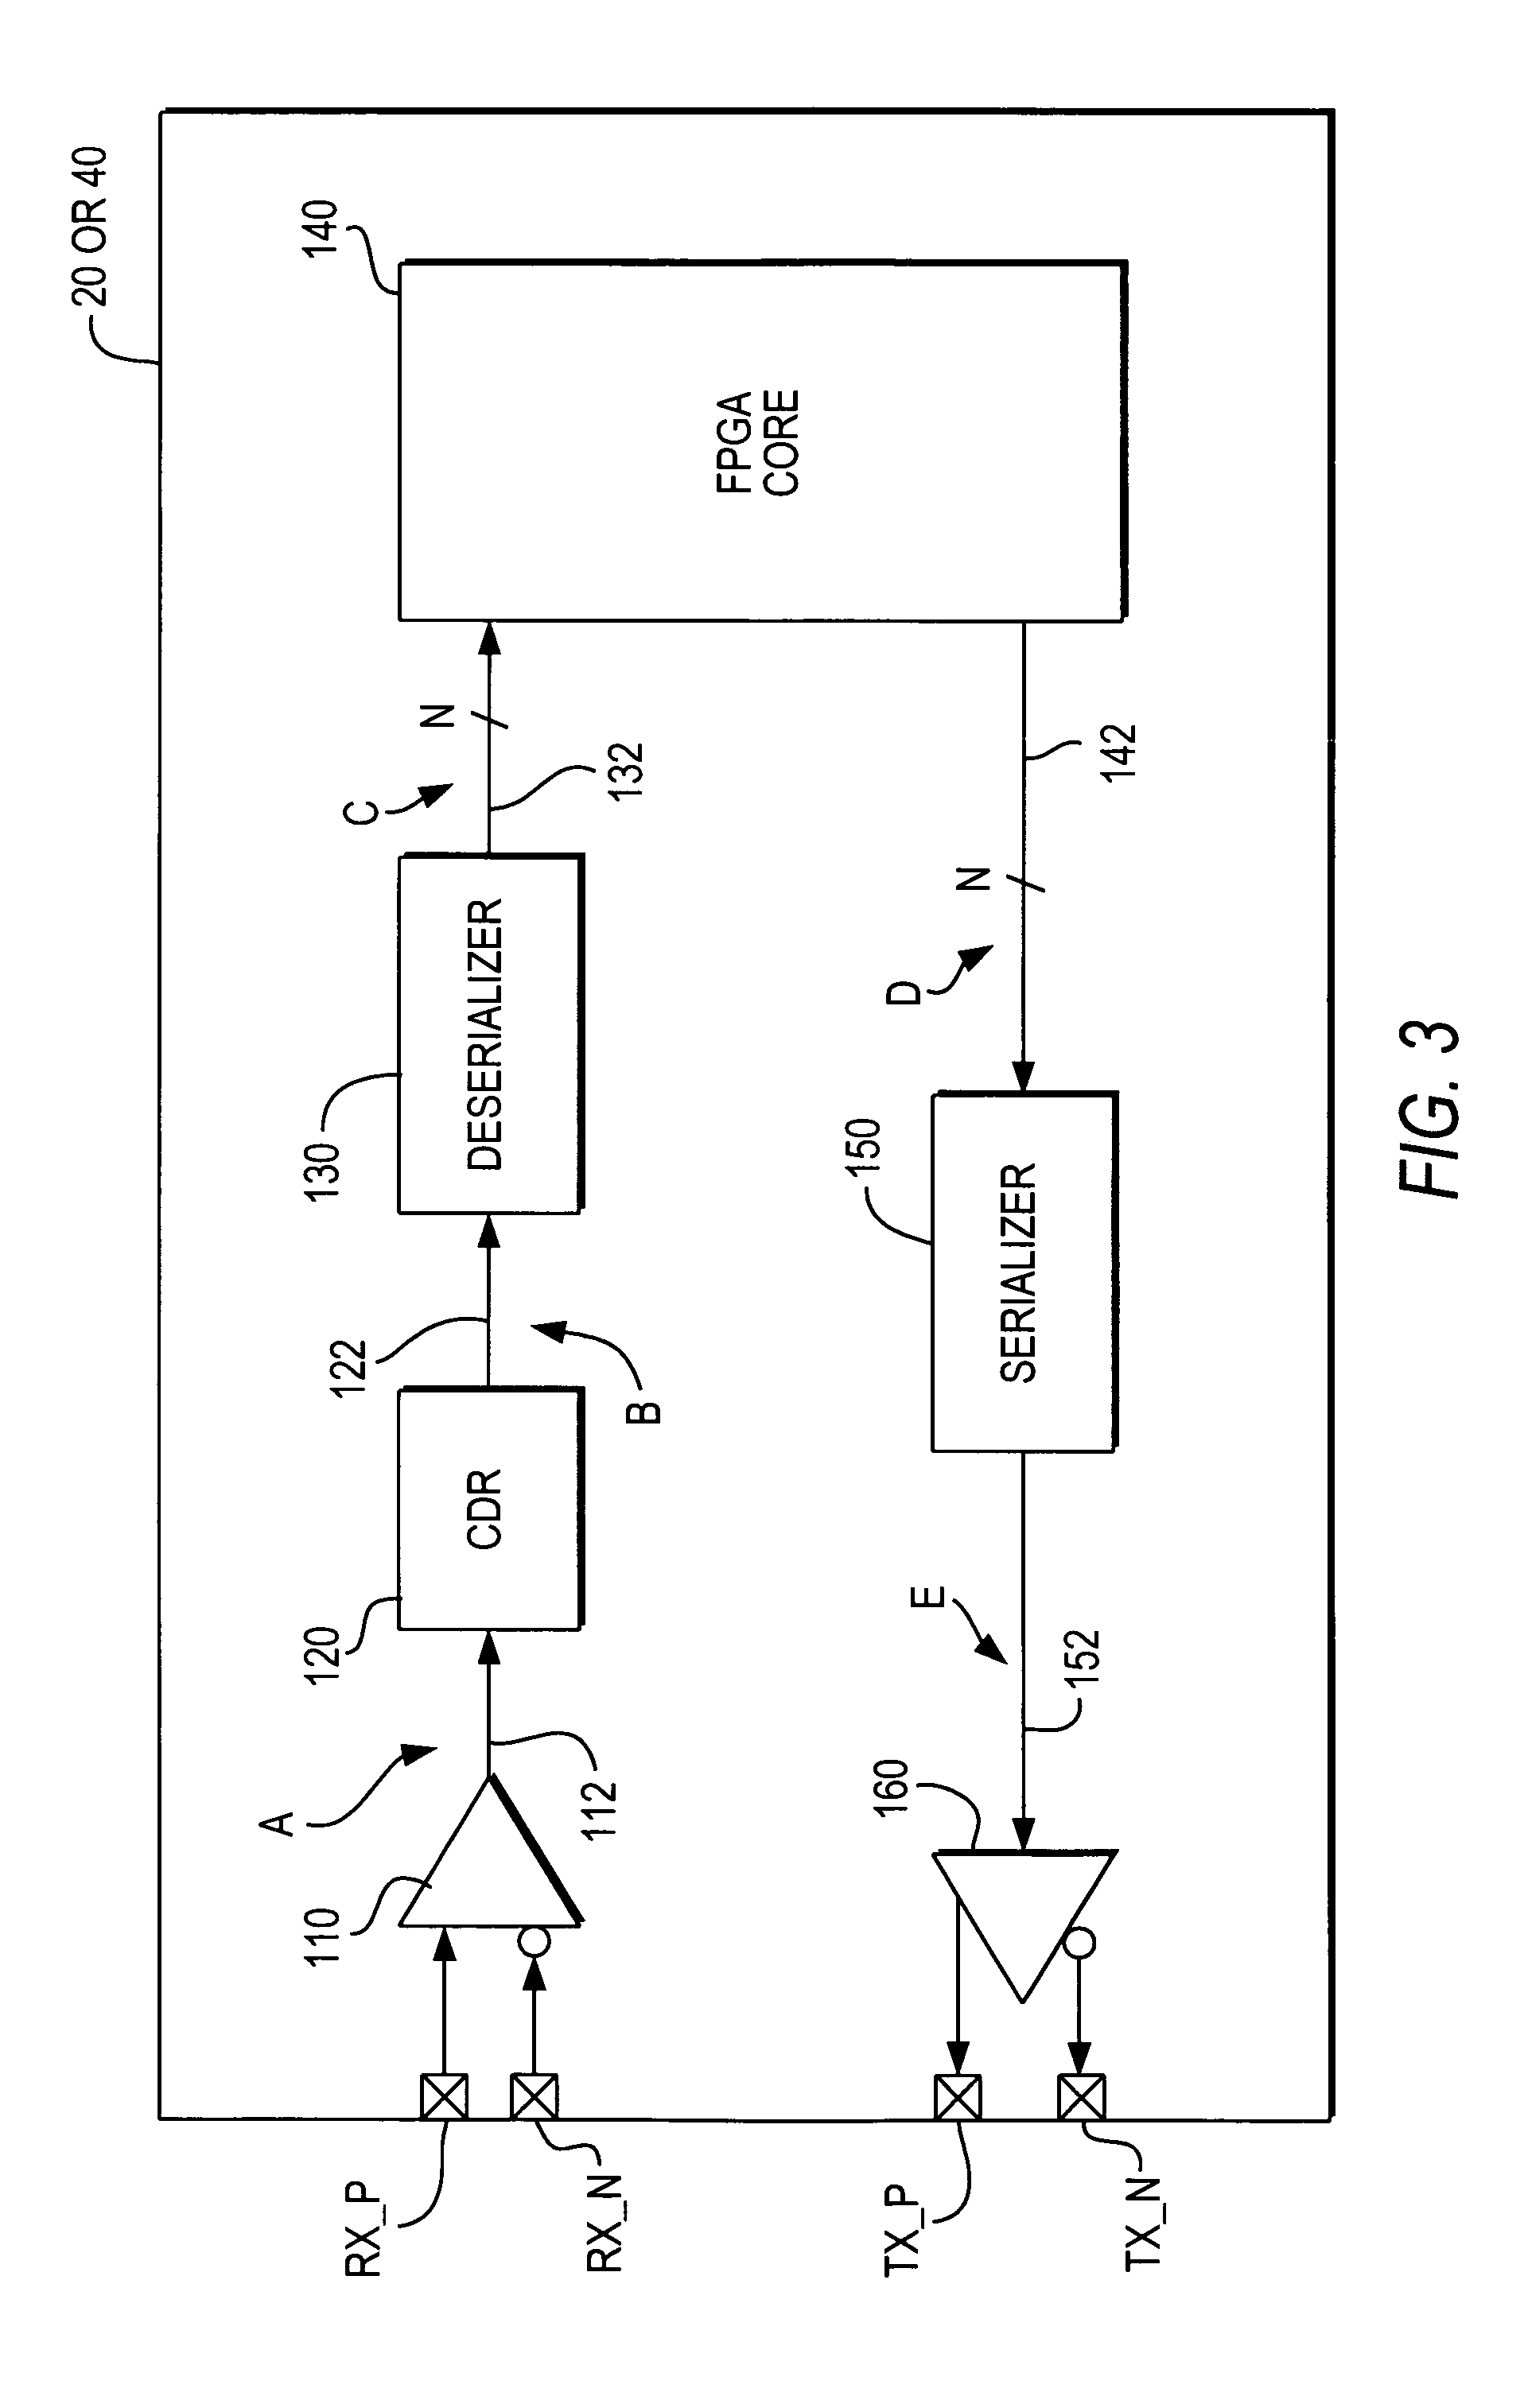 Selectable inversion of differential input and/or output pins in programmable logic devices